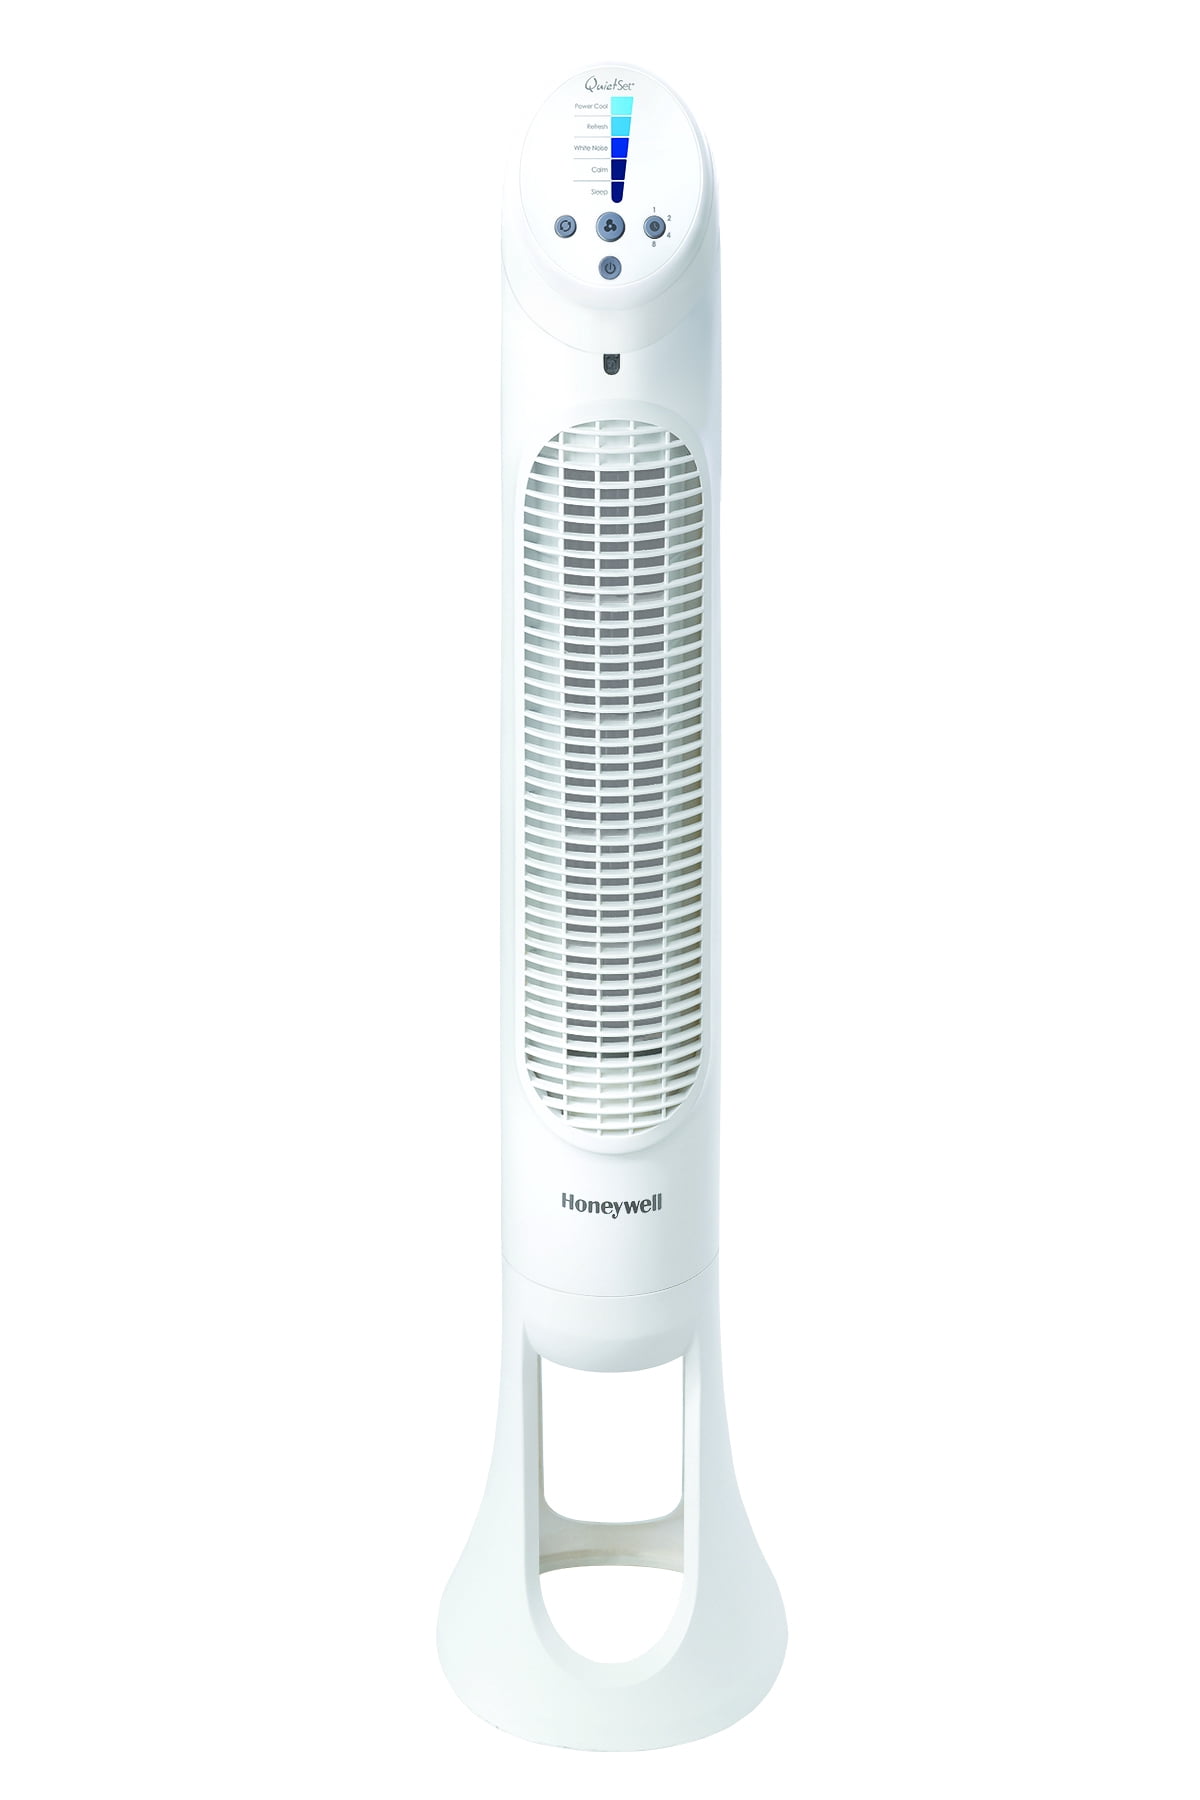 Honeywell Whole Room Tower Fan Oscillating Remote Control Quiet Cooling Airflow 